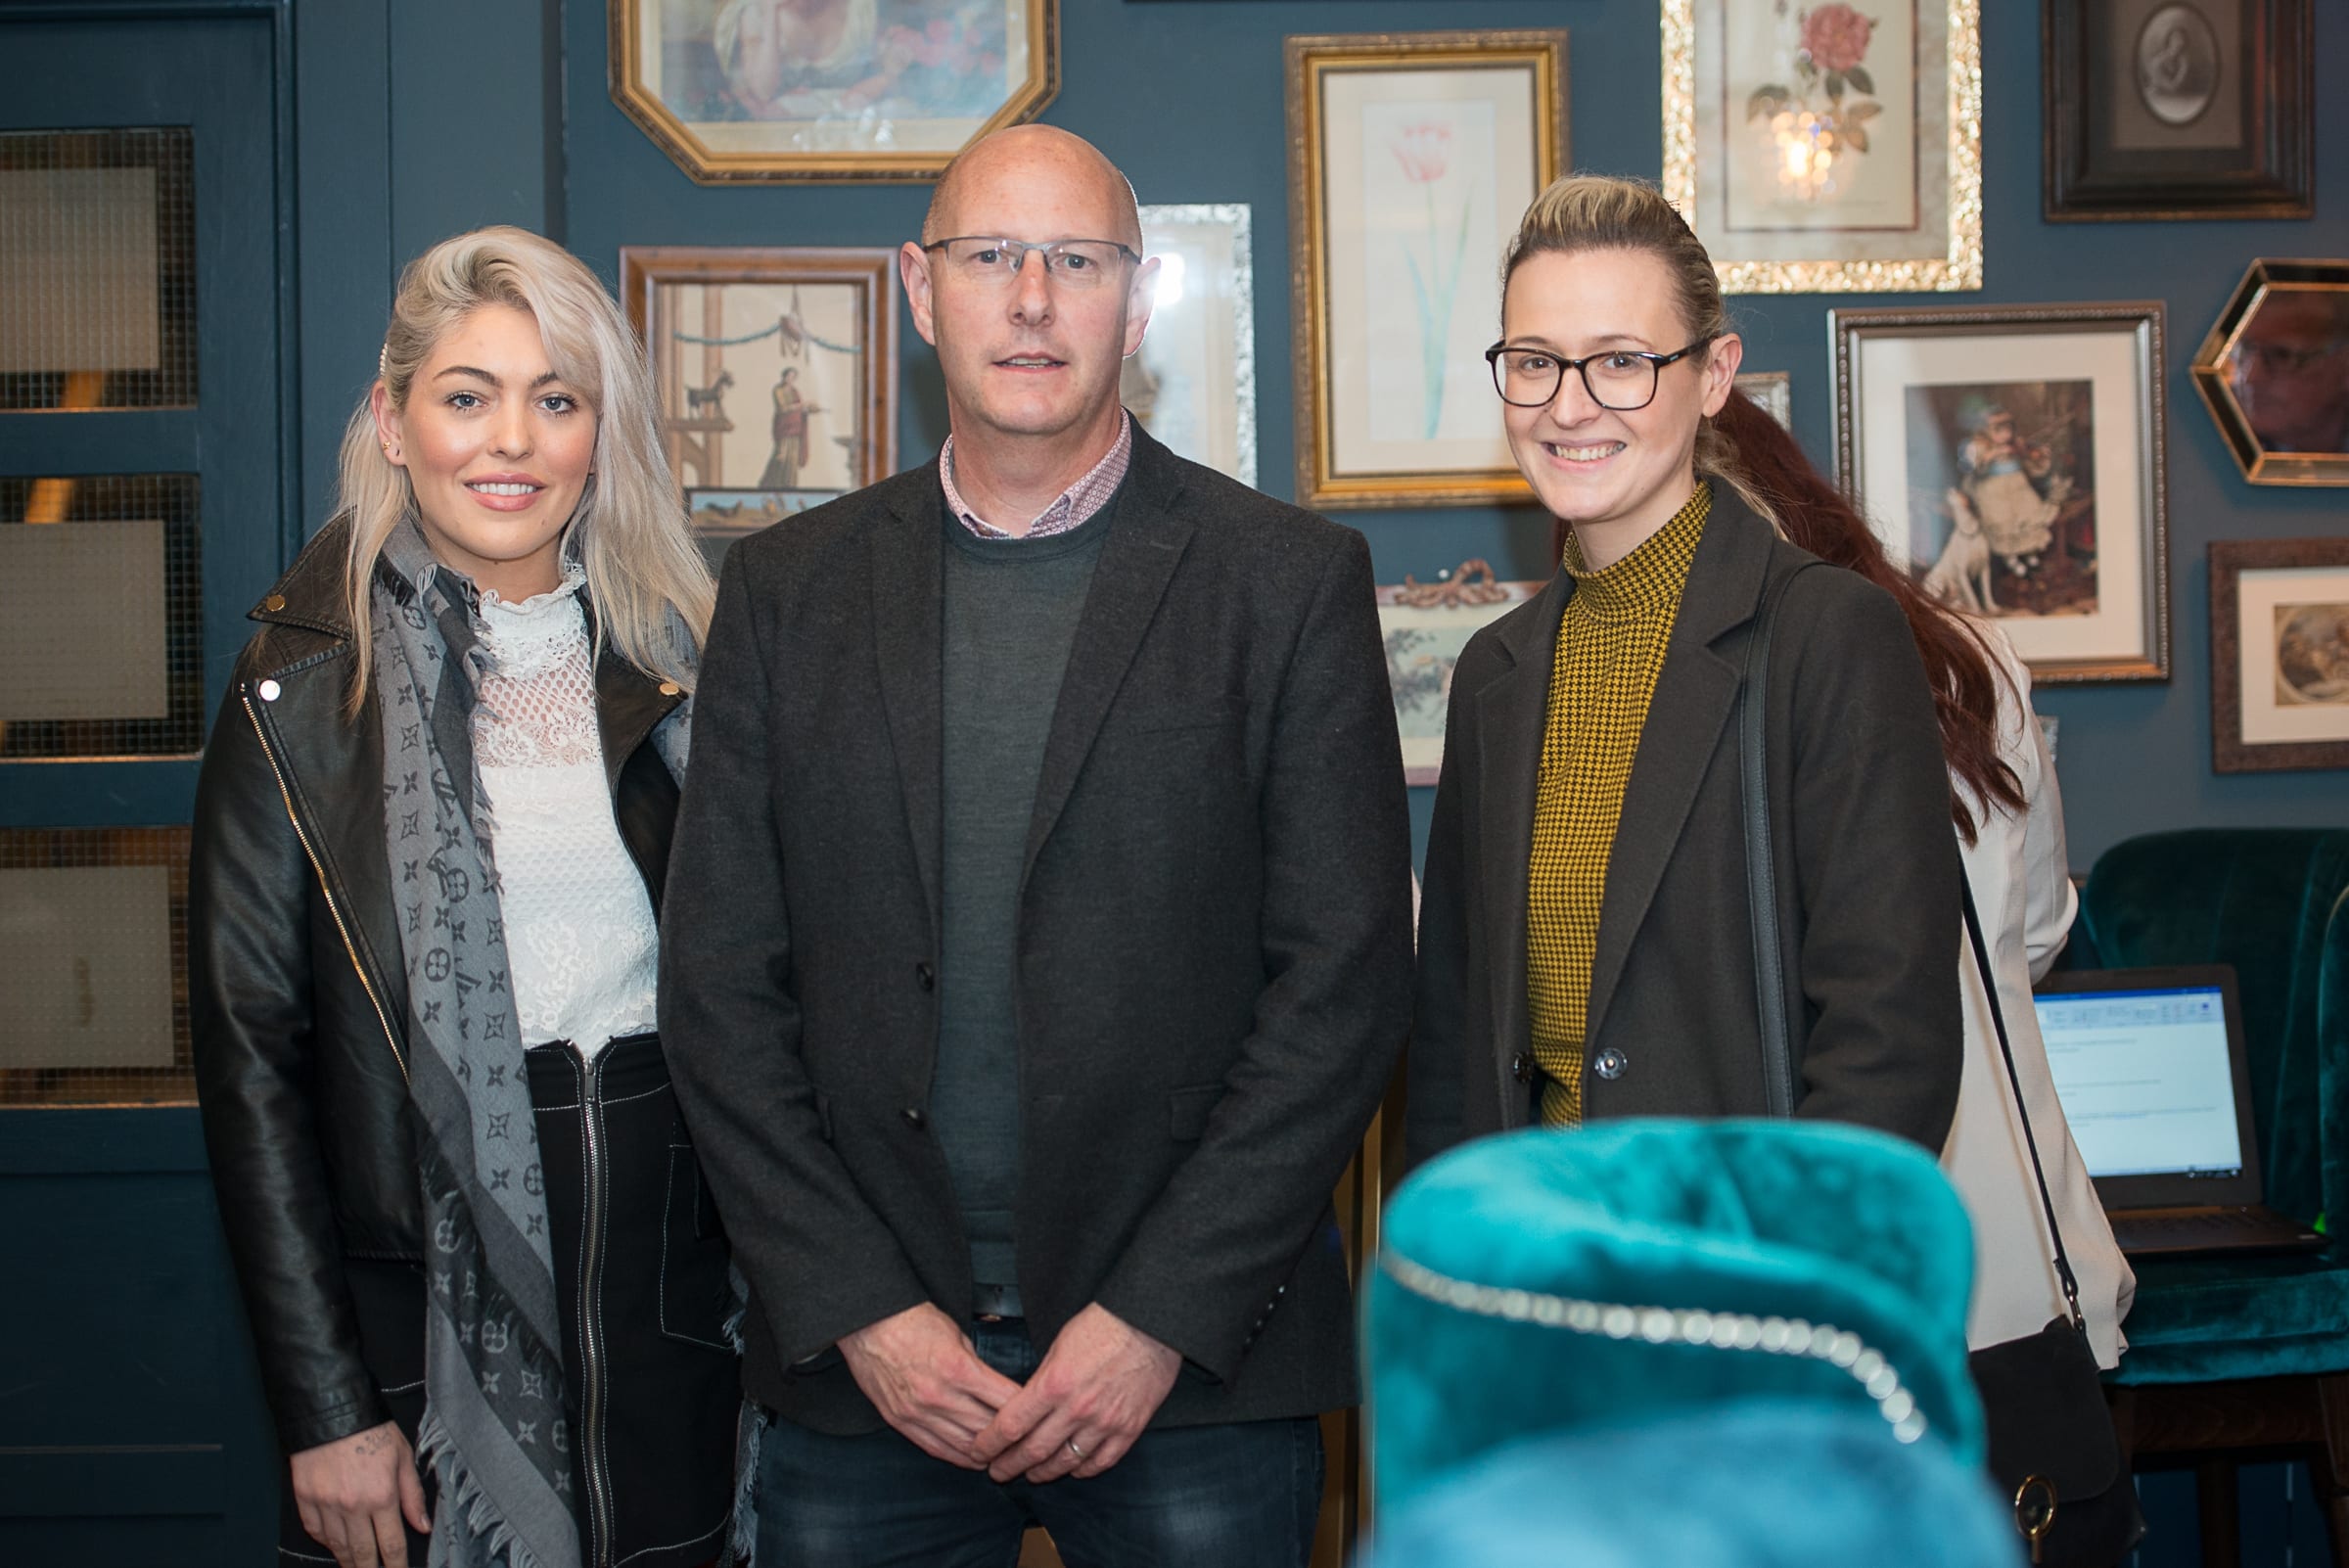 No repro fee: Networking with a Difference held in 101 O’Connell Street. Facilitated by Stephen Pitcher.  23-05-2019, From Left to Right: Derval Mulcahy - Adecco, Michael O’Connor - Praxis Architecture, Rebecca Power- Adecco
Photo credit Shauna Kennedy